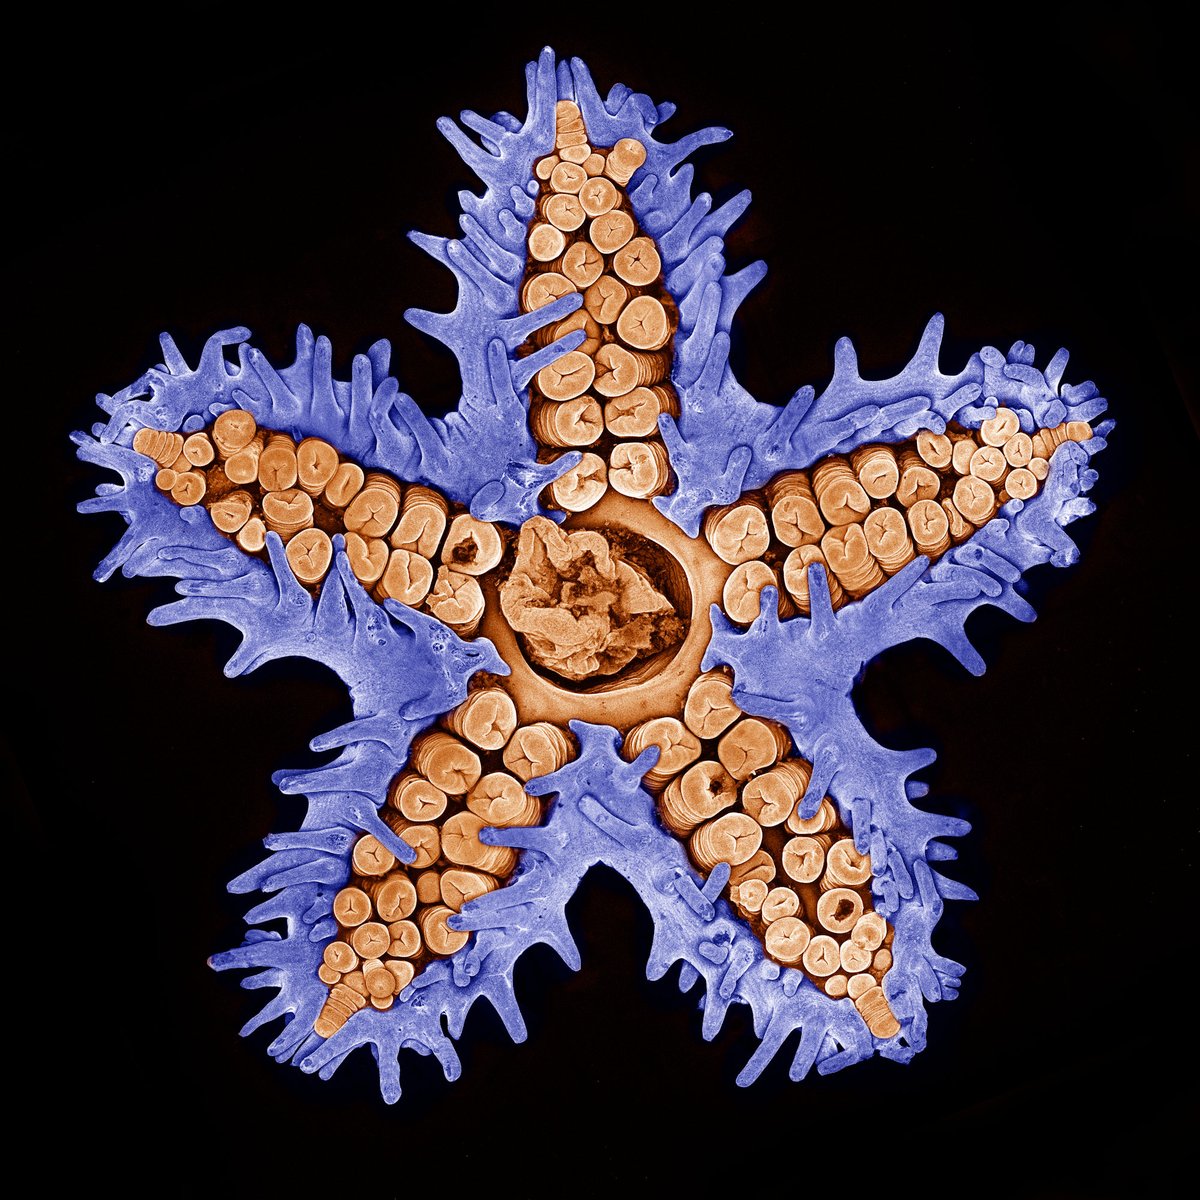 High five, it's almost the weekend! Did you know that some species of sea stars can have up to 40 arms? bit.ly/4cvEpJn Credit: Evan Darling